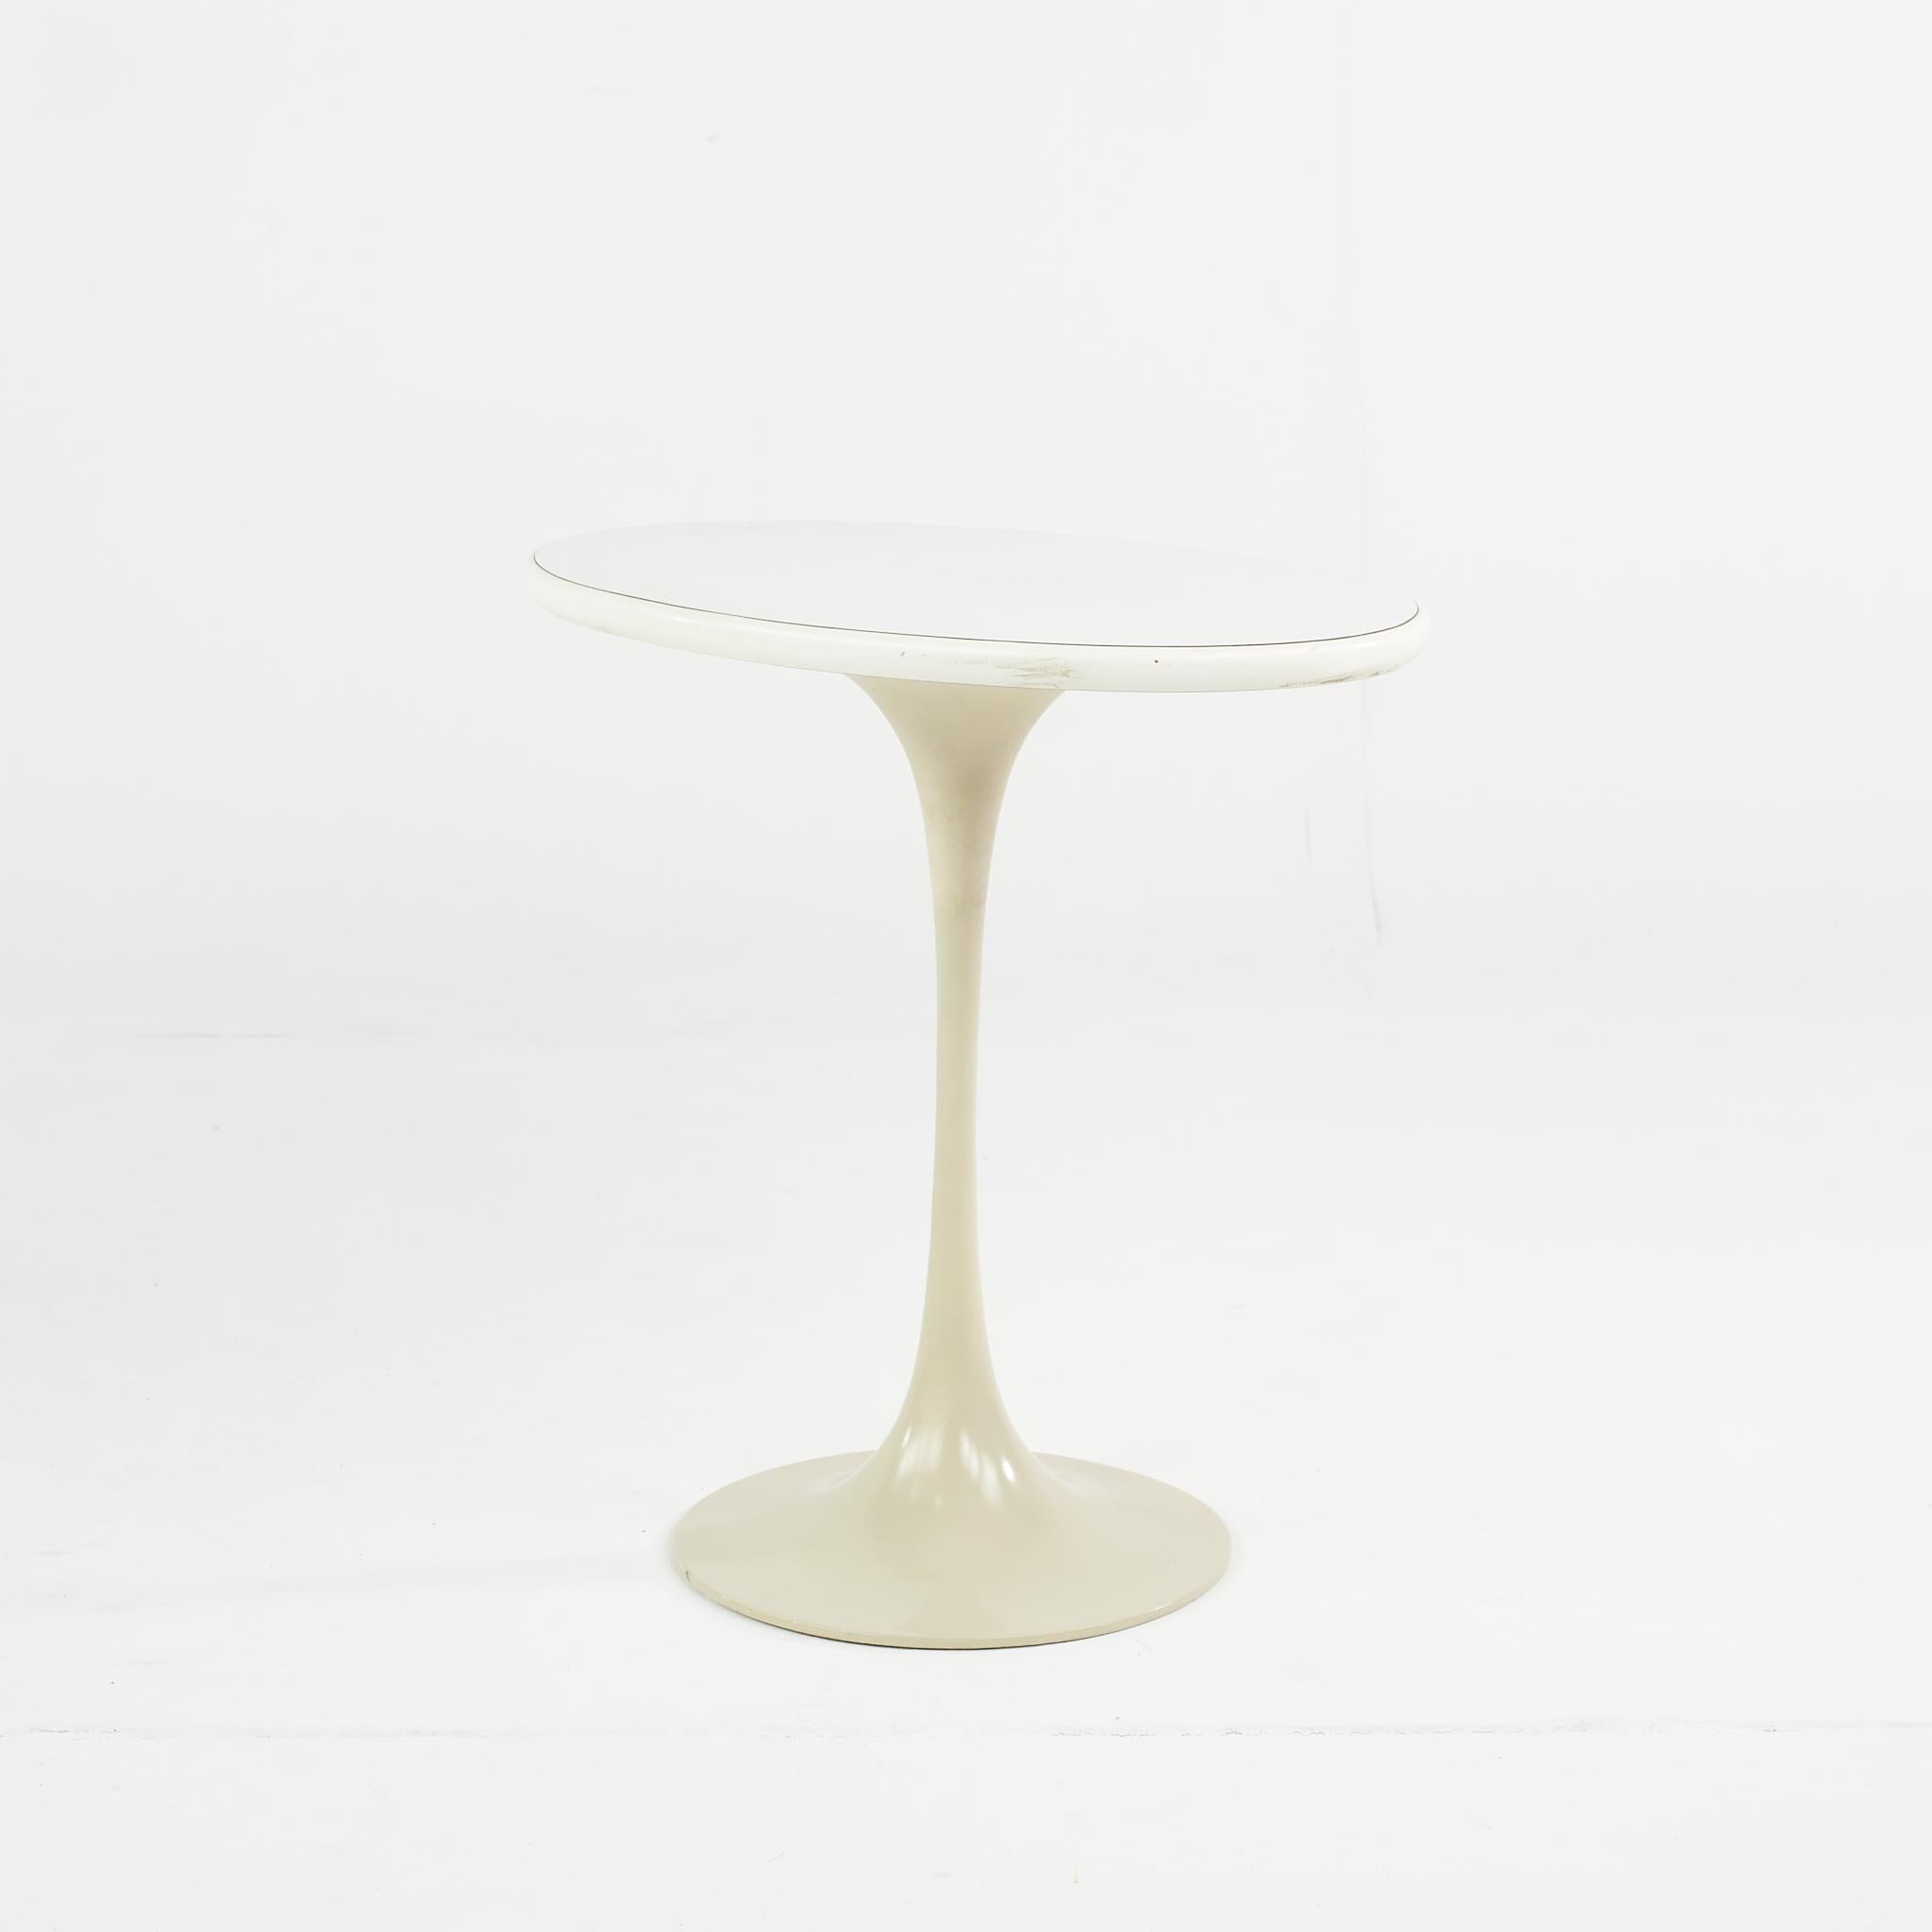 Late 20th Century Eero Saarinen for Knoll Style Mid-Century Oval Tulip Tables, a Pair For Sale